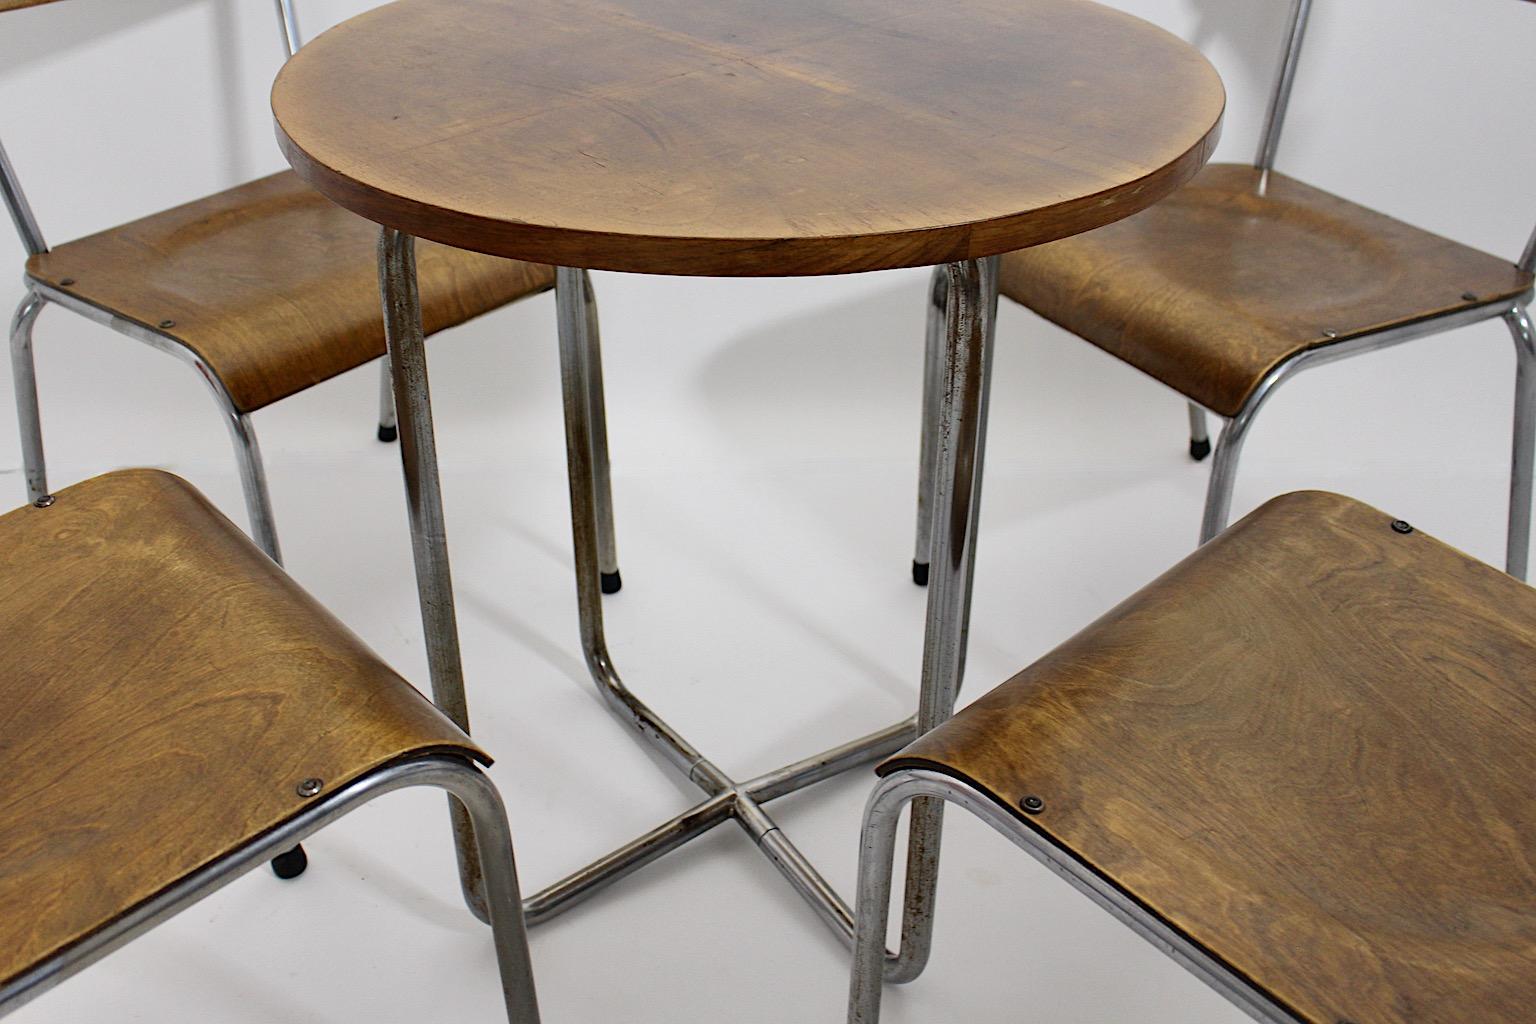 Bauhaus style vintage dining room set consisting of four ( 4 )  dining chairs and one ( 1 )  dining table from chromed tubed steel and plywood 1930s Germany.
A beautiful vintage dining set with 4 dining chairs and one matching circular dining table